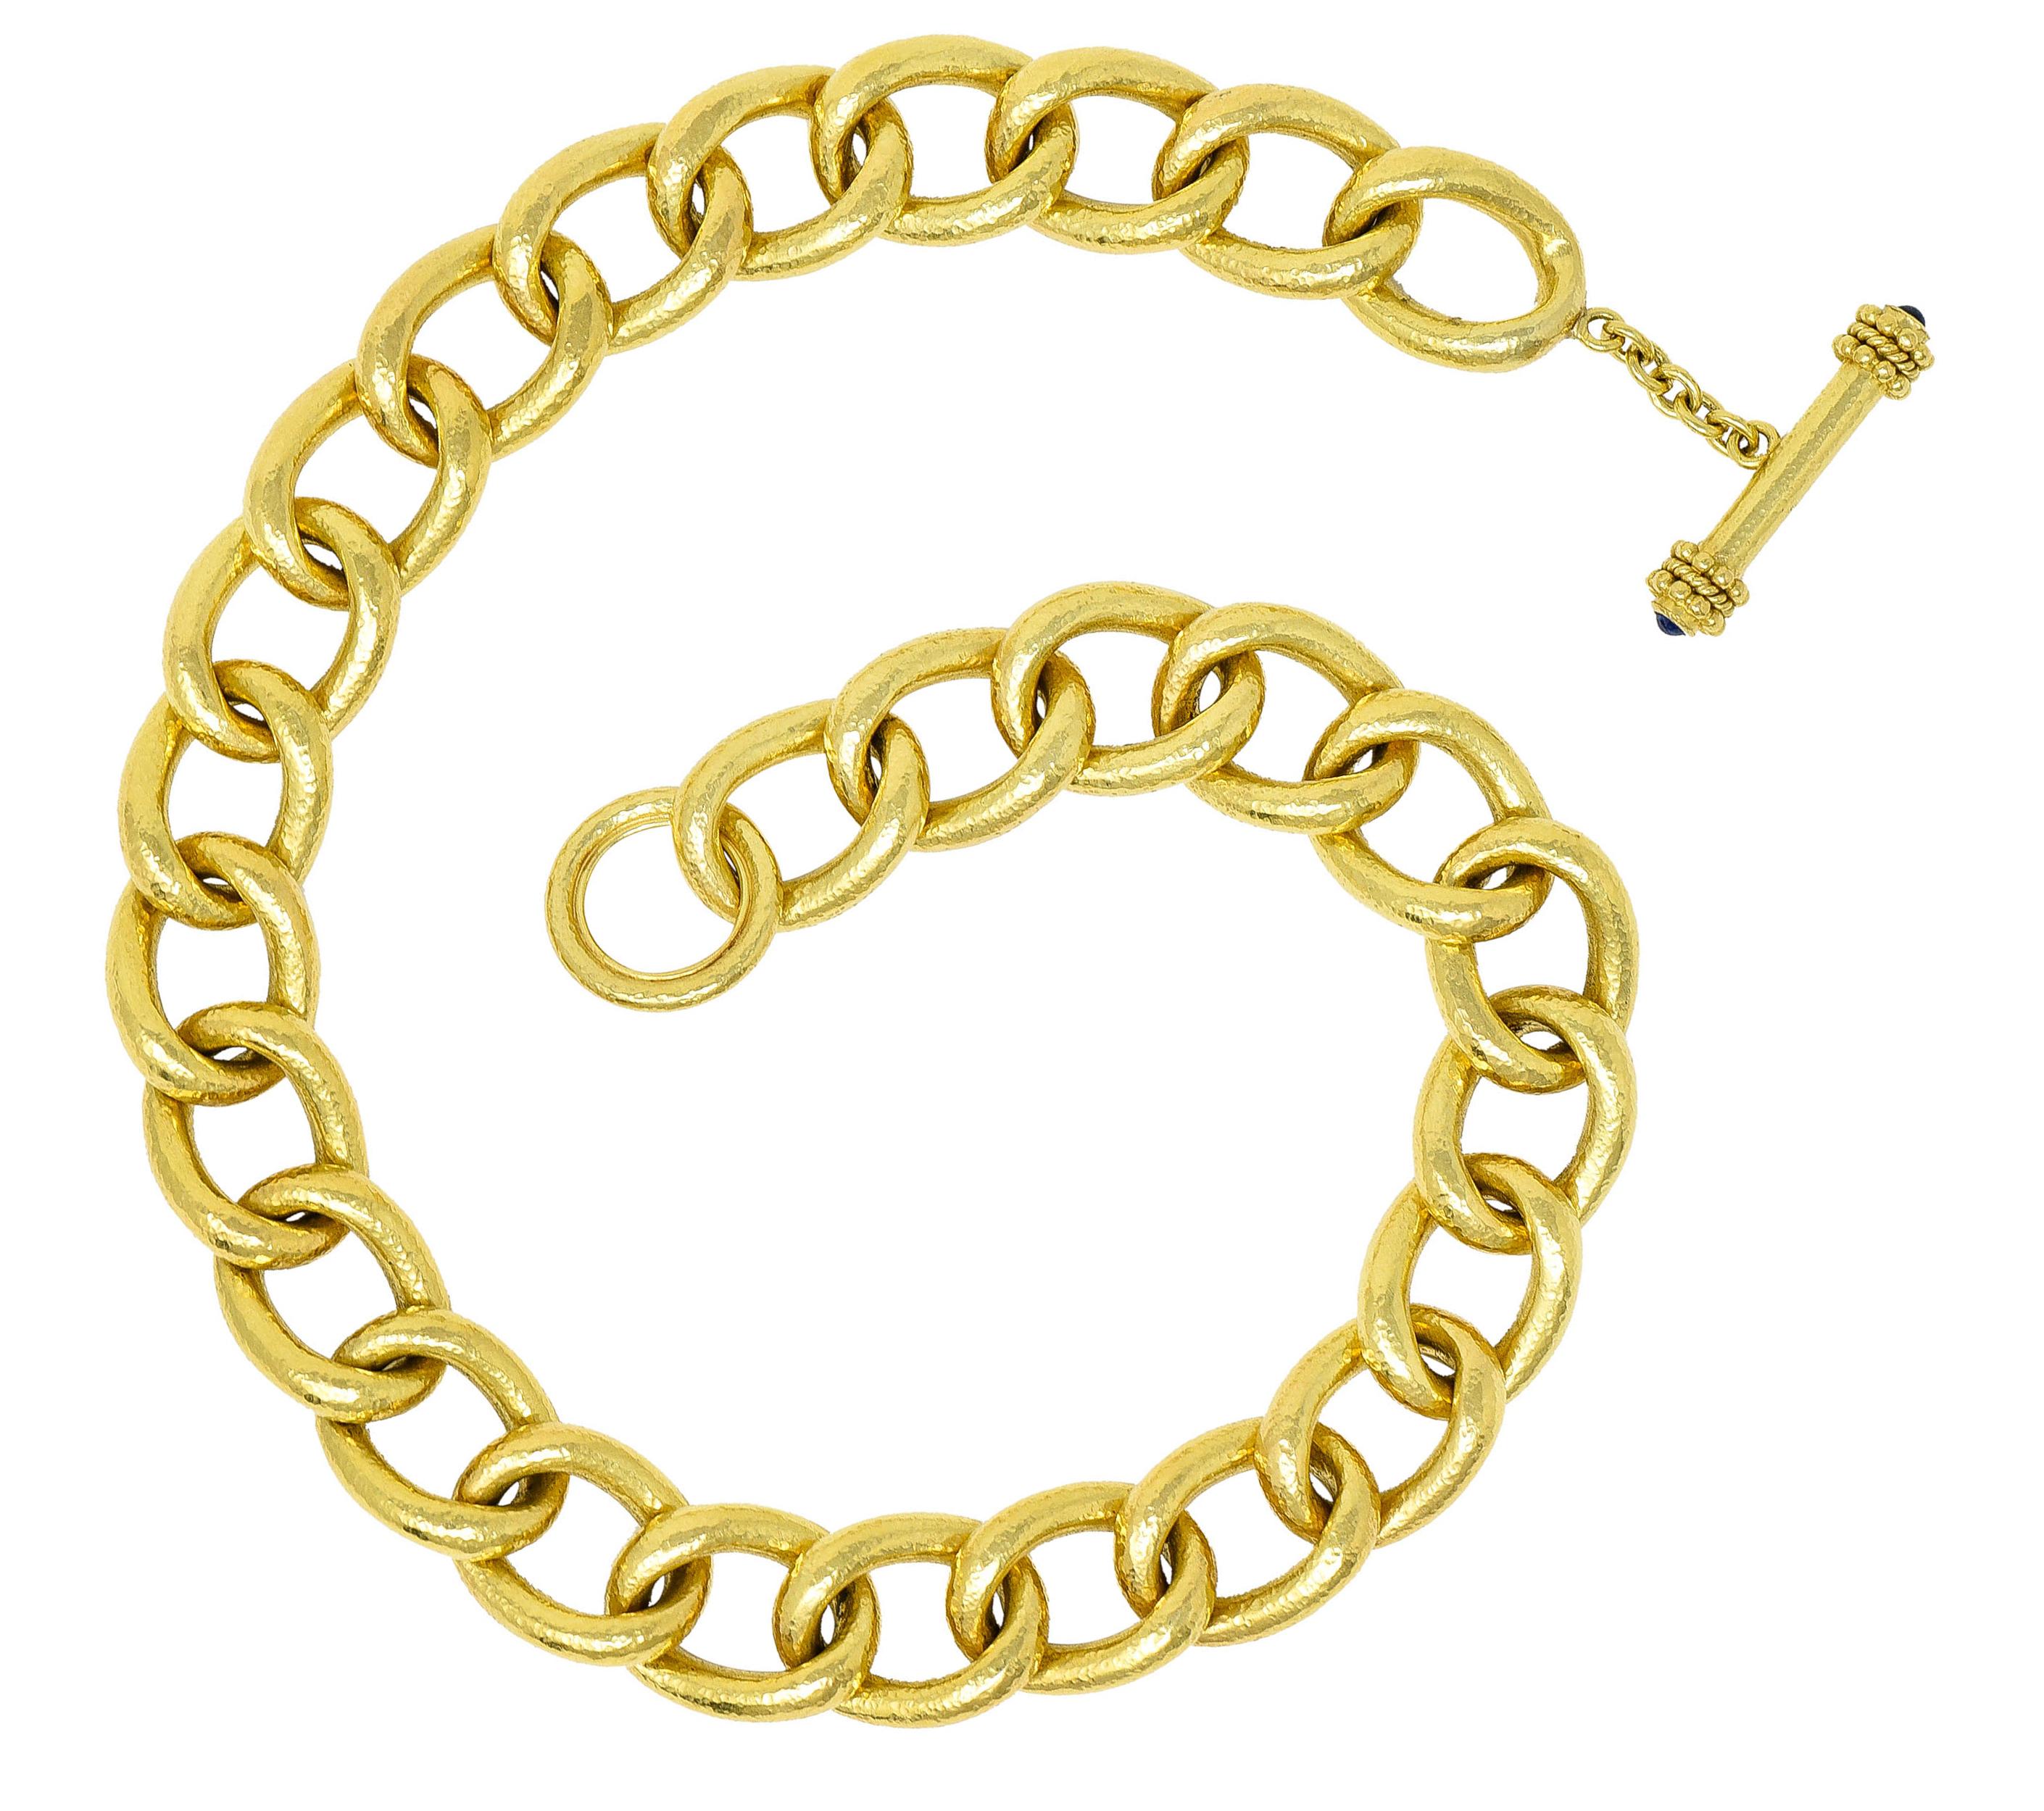 Collar necklace is comprised of large curbed links with a hammered finish

Completed by a bar toggle clasp with a twisted rope motif and gold bead detail

Bar terminates at each end as a bezel set 3.0 mm round sapphire cabochon - vibrantly